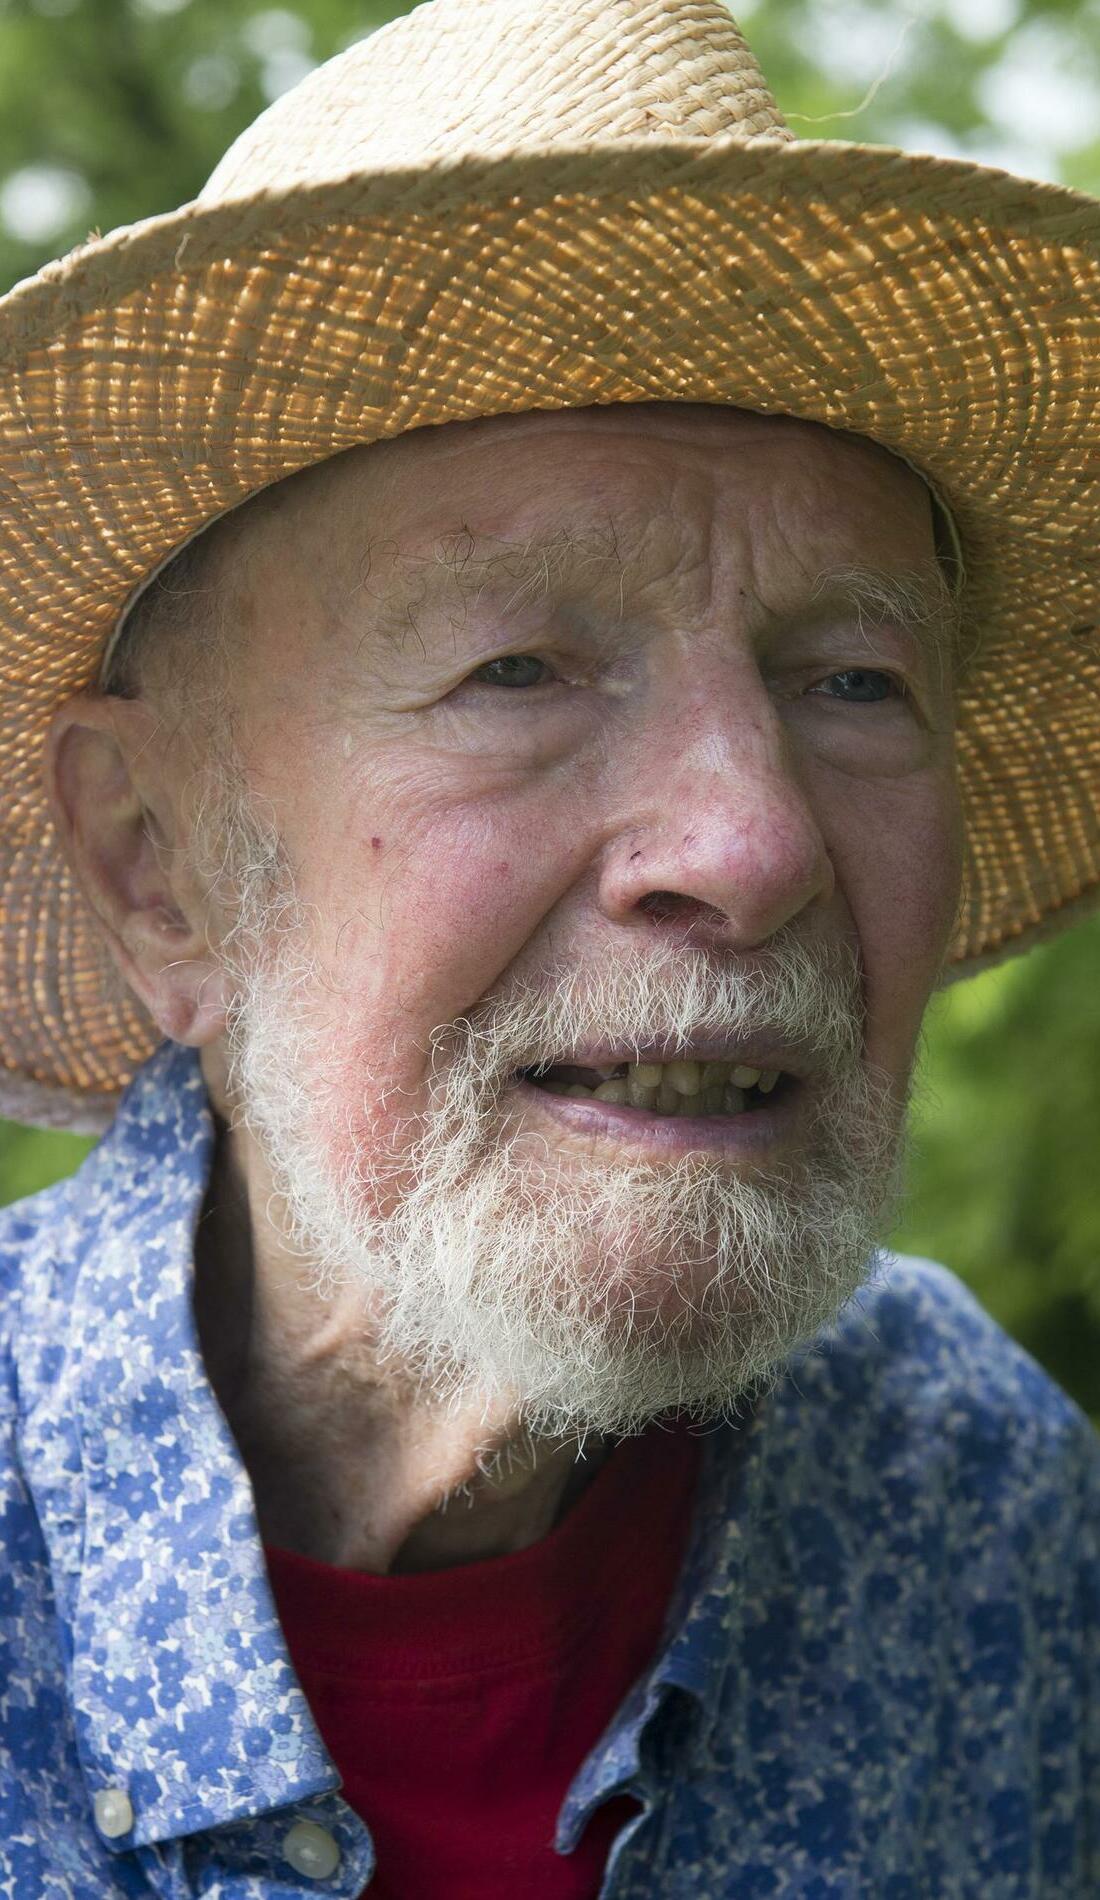 A Pete Seeger live event